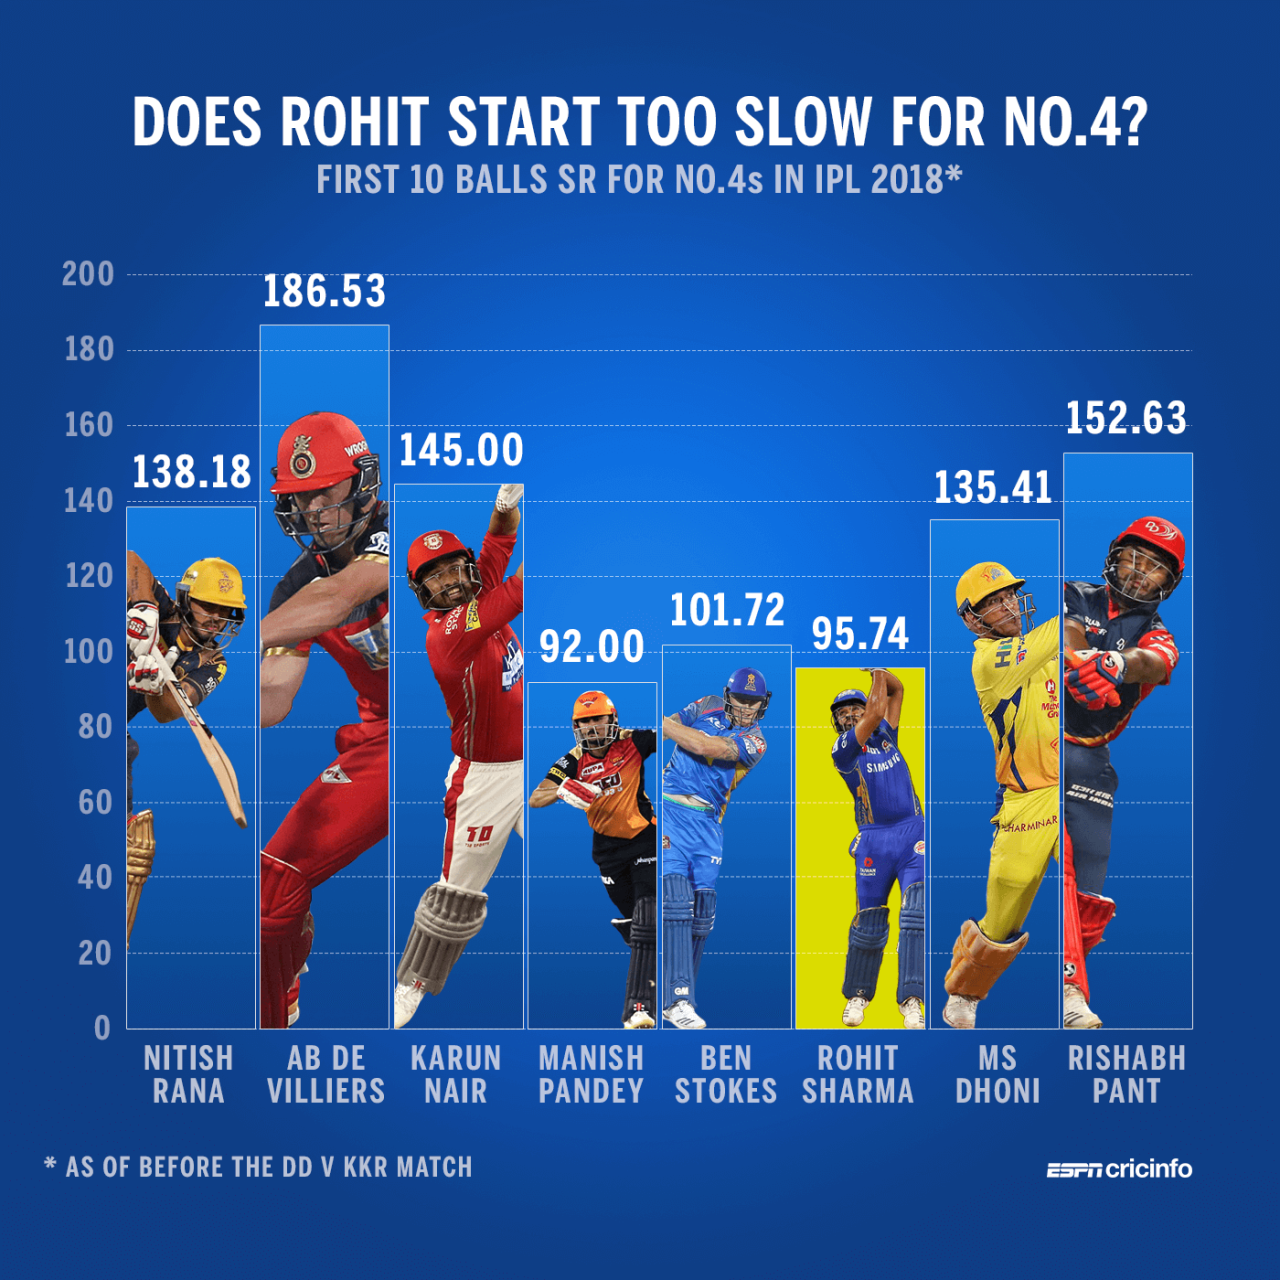 Rohit Sharma has accelerated well this IPL, but his slow starts may be costing Mumbai Indians